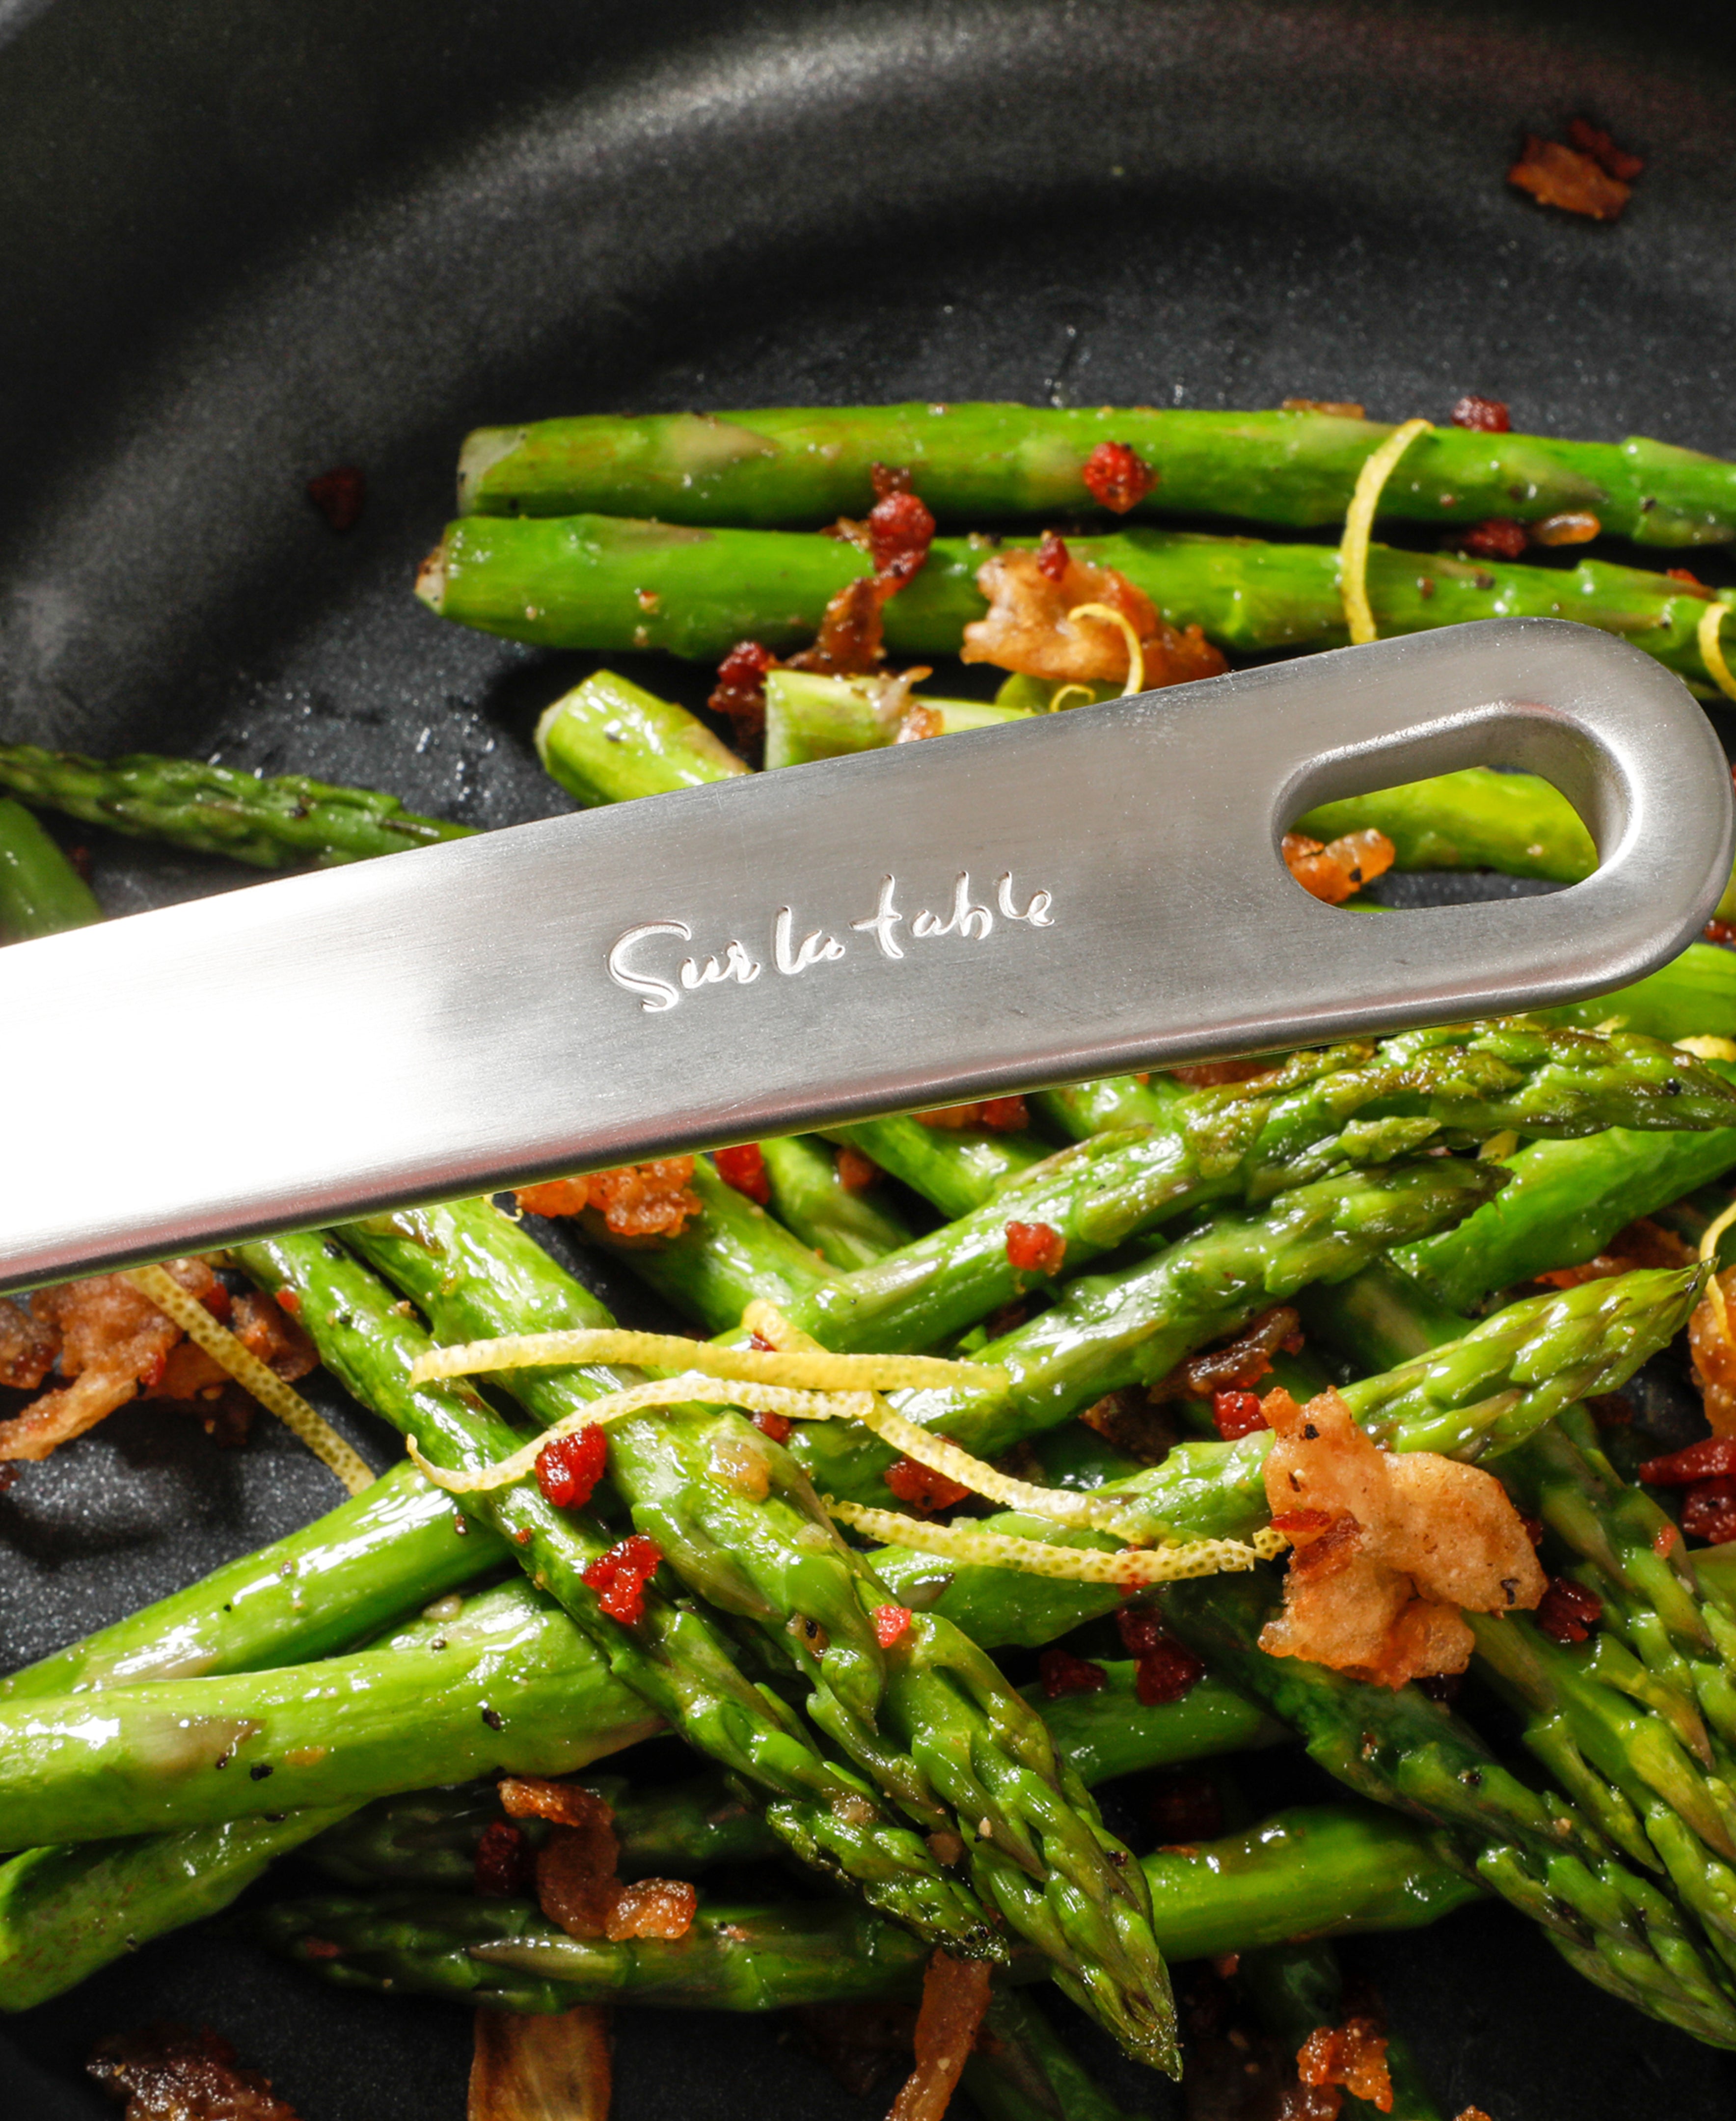 Cook N Home 12 in. Hard Anodized Nonstick Aluminum Saute Frying